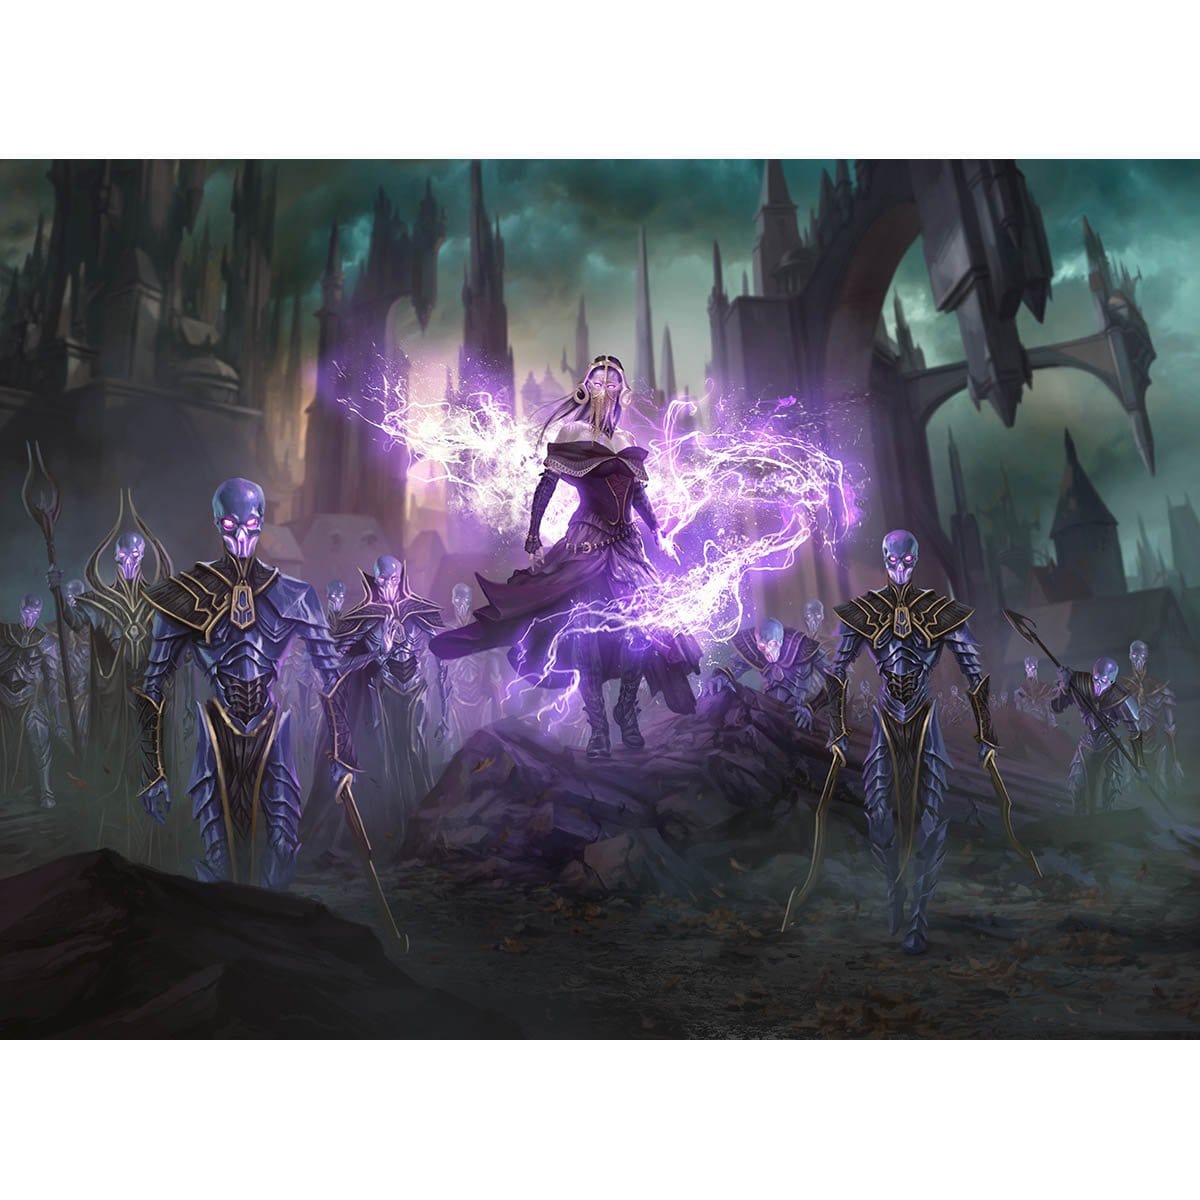 Command the Dreadhorde Print - Print - Original Magic Art - Accessories for Magic the Gathering and other card games